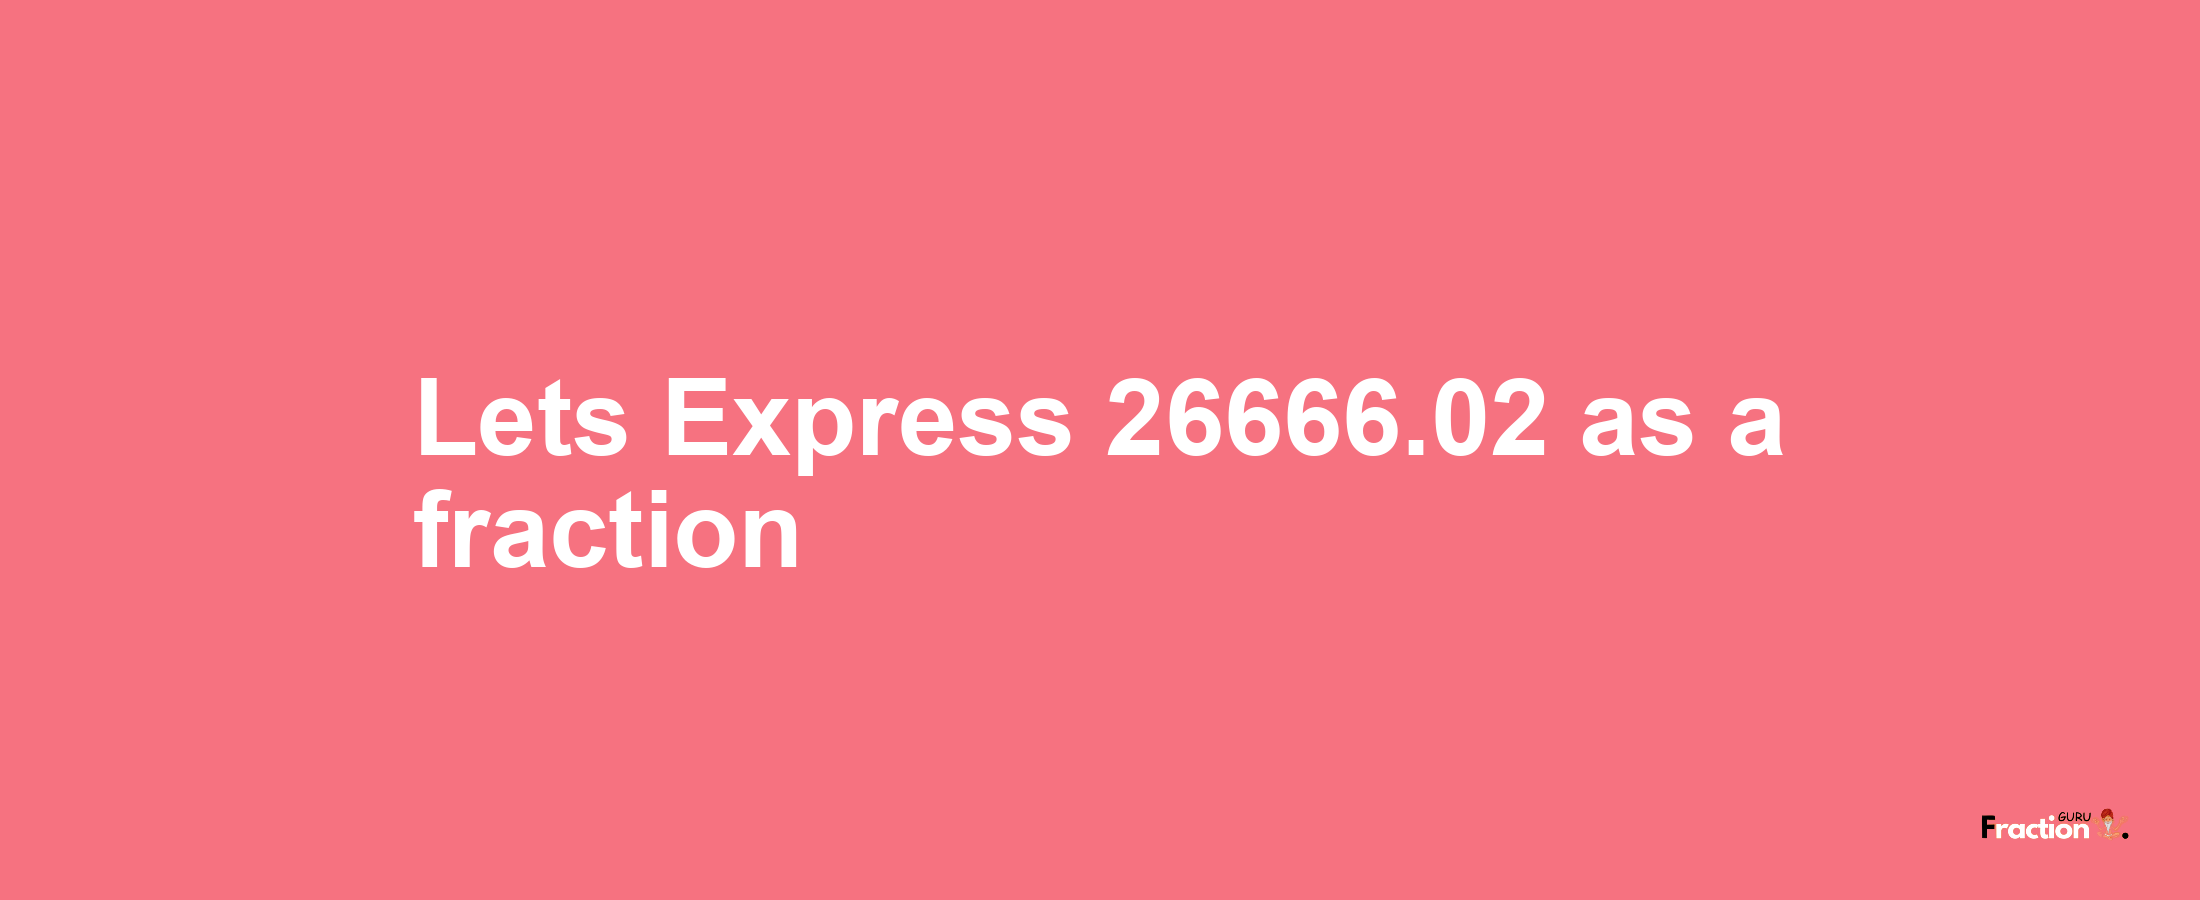 Lets Express 26666.02 as afraction